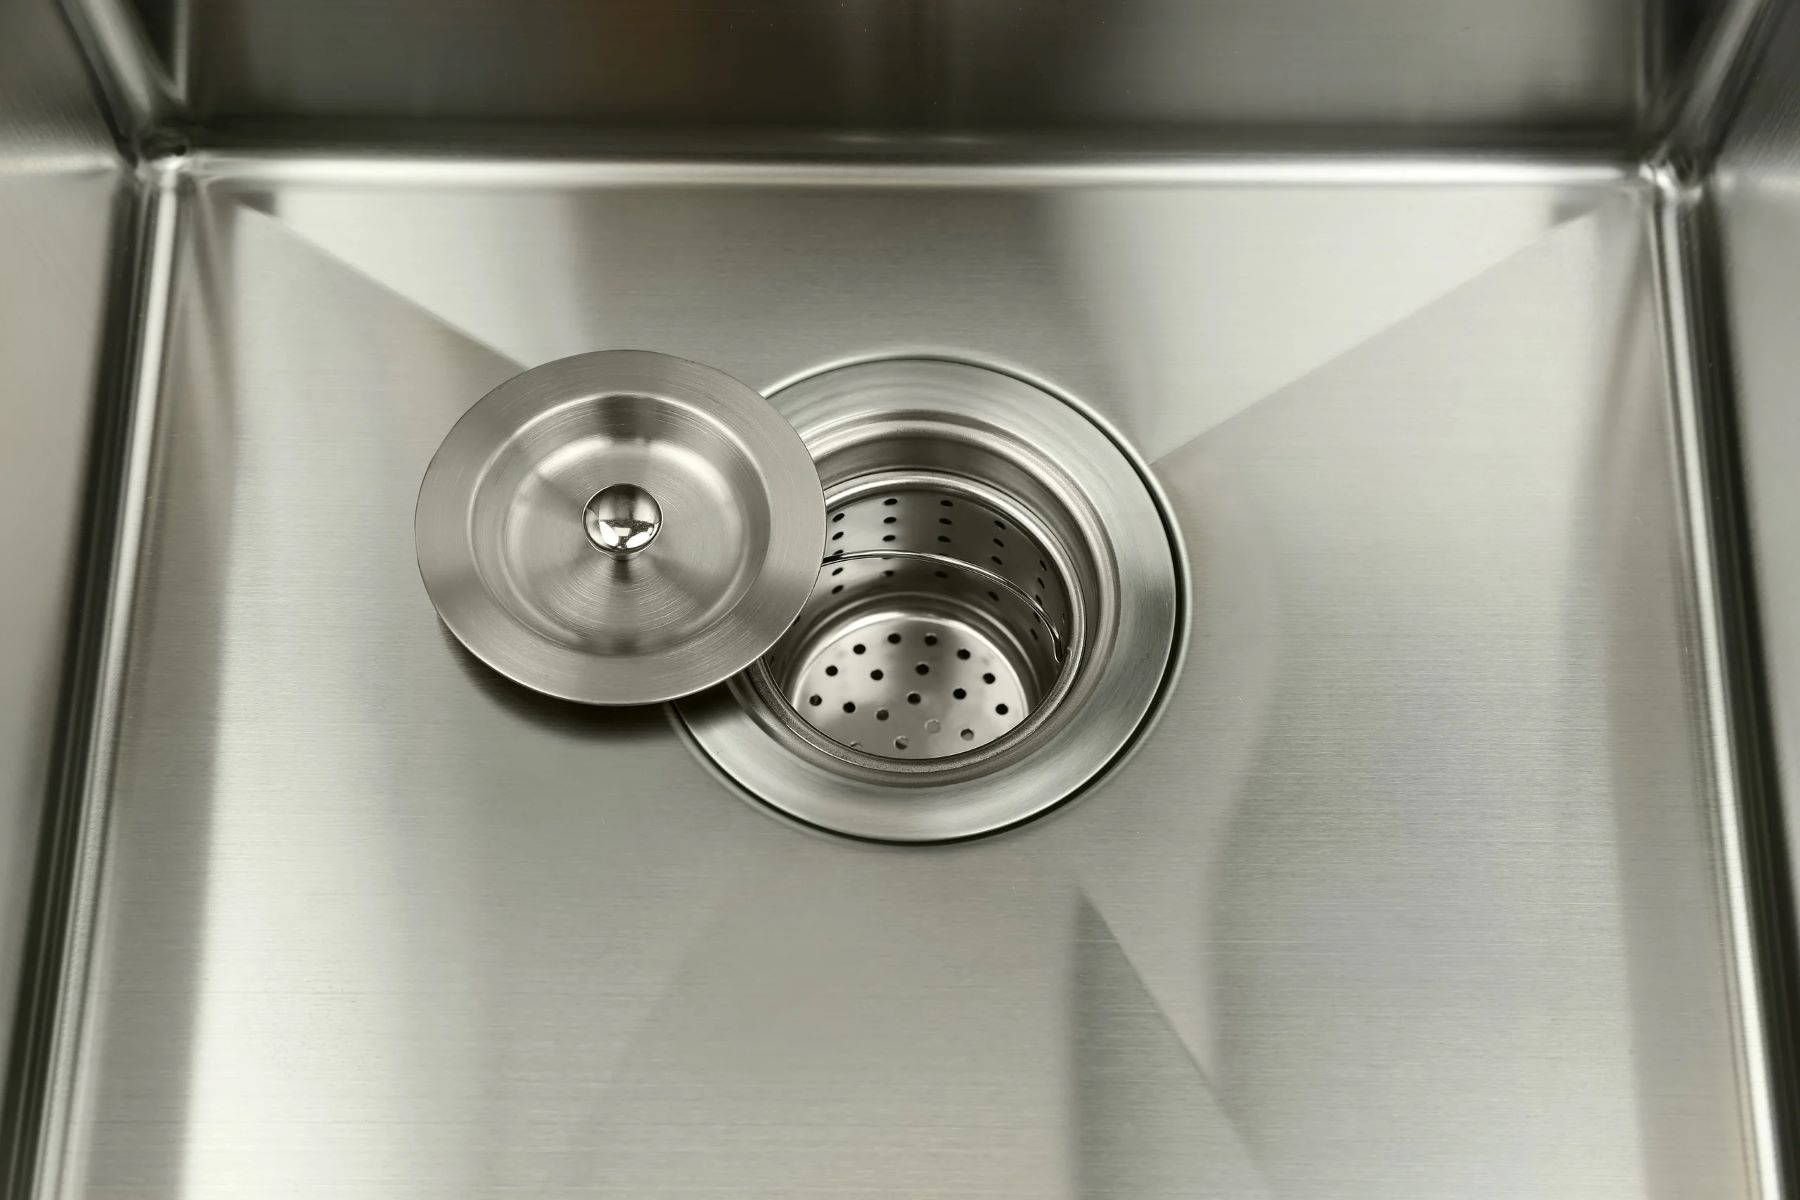 Say Goodbye To Scratches On Your Brushed Stainless Steel Sink With These Genius Hacks!